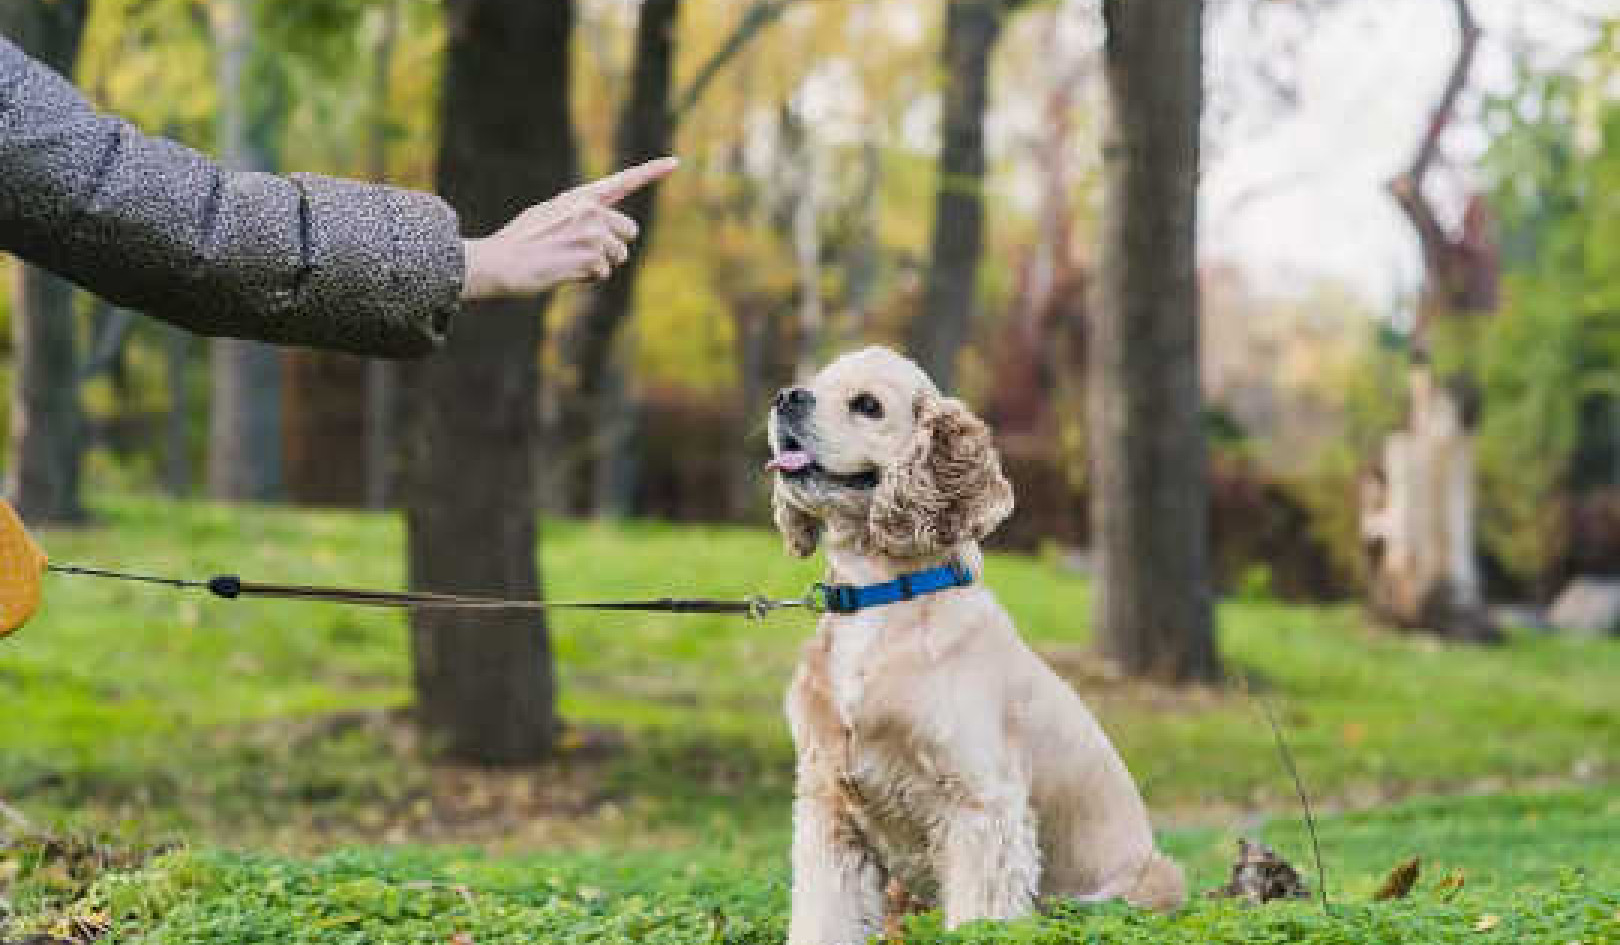 How To Train Your Dog In Basic Life Skills